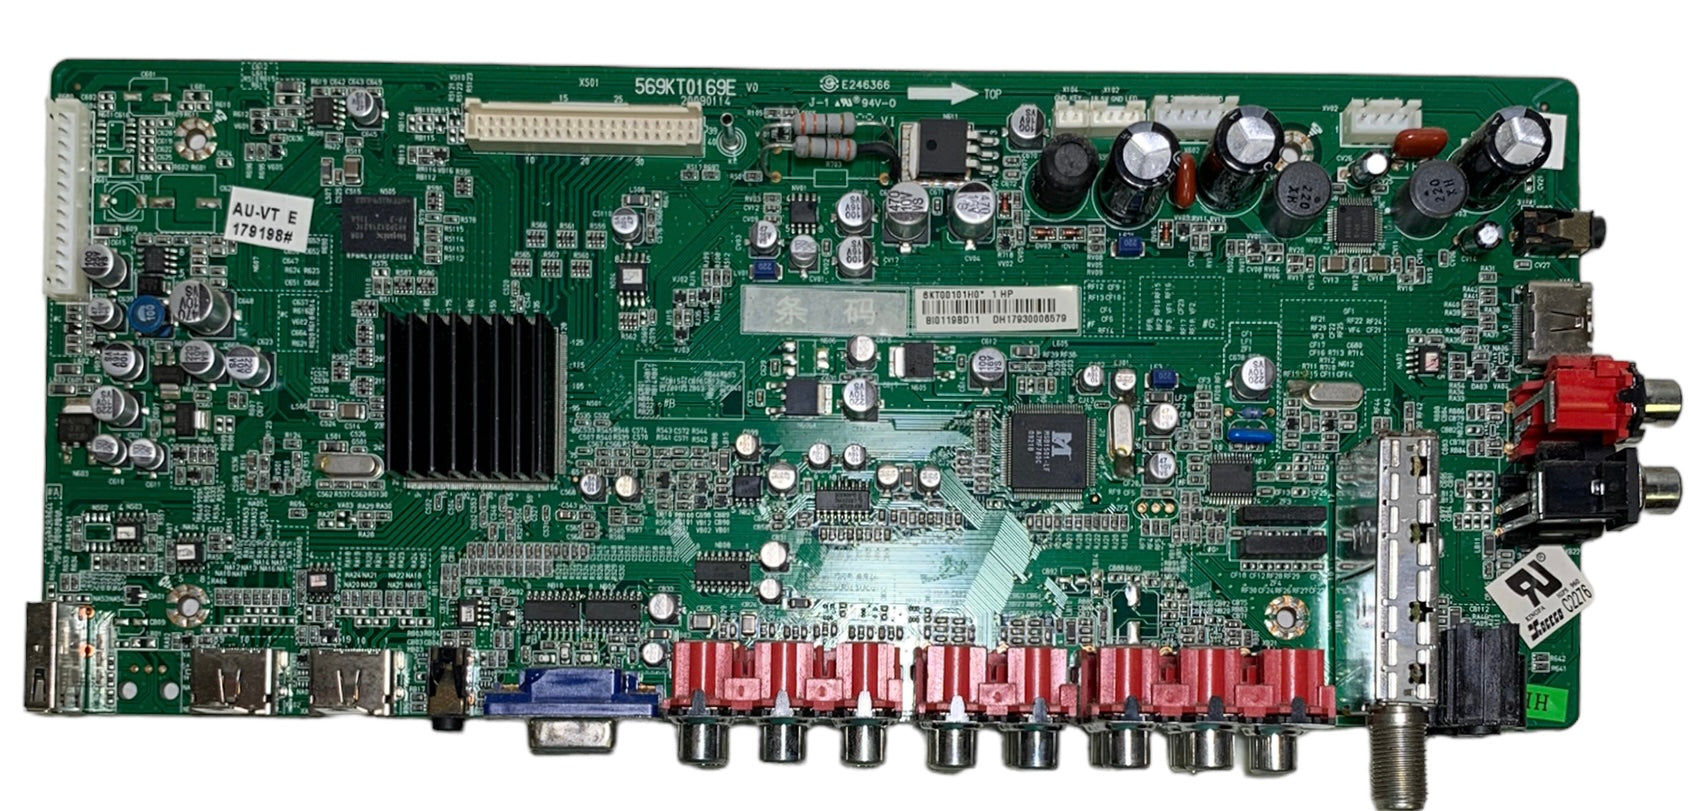 Dynex 6KT00101H0 (569KT0169E) Main Board for DX-L32-10A